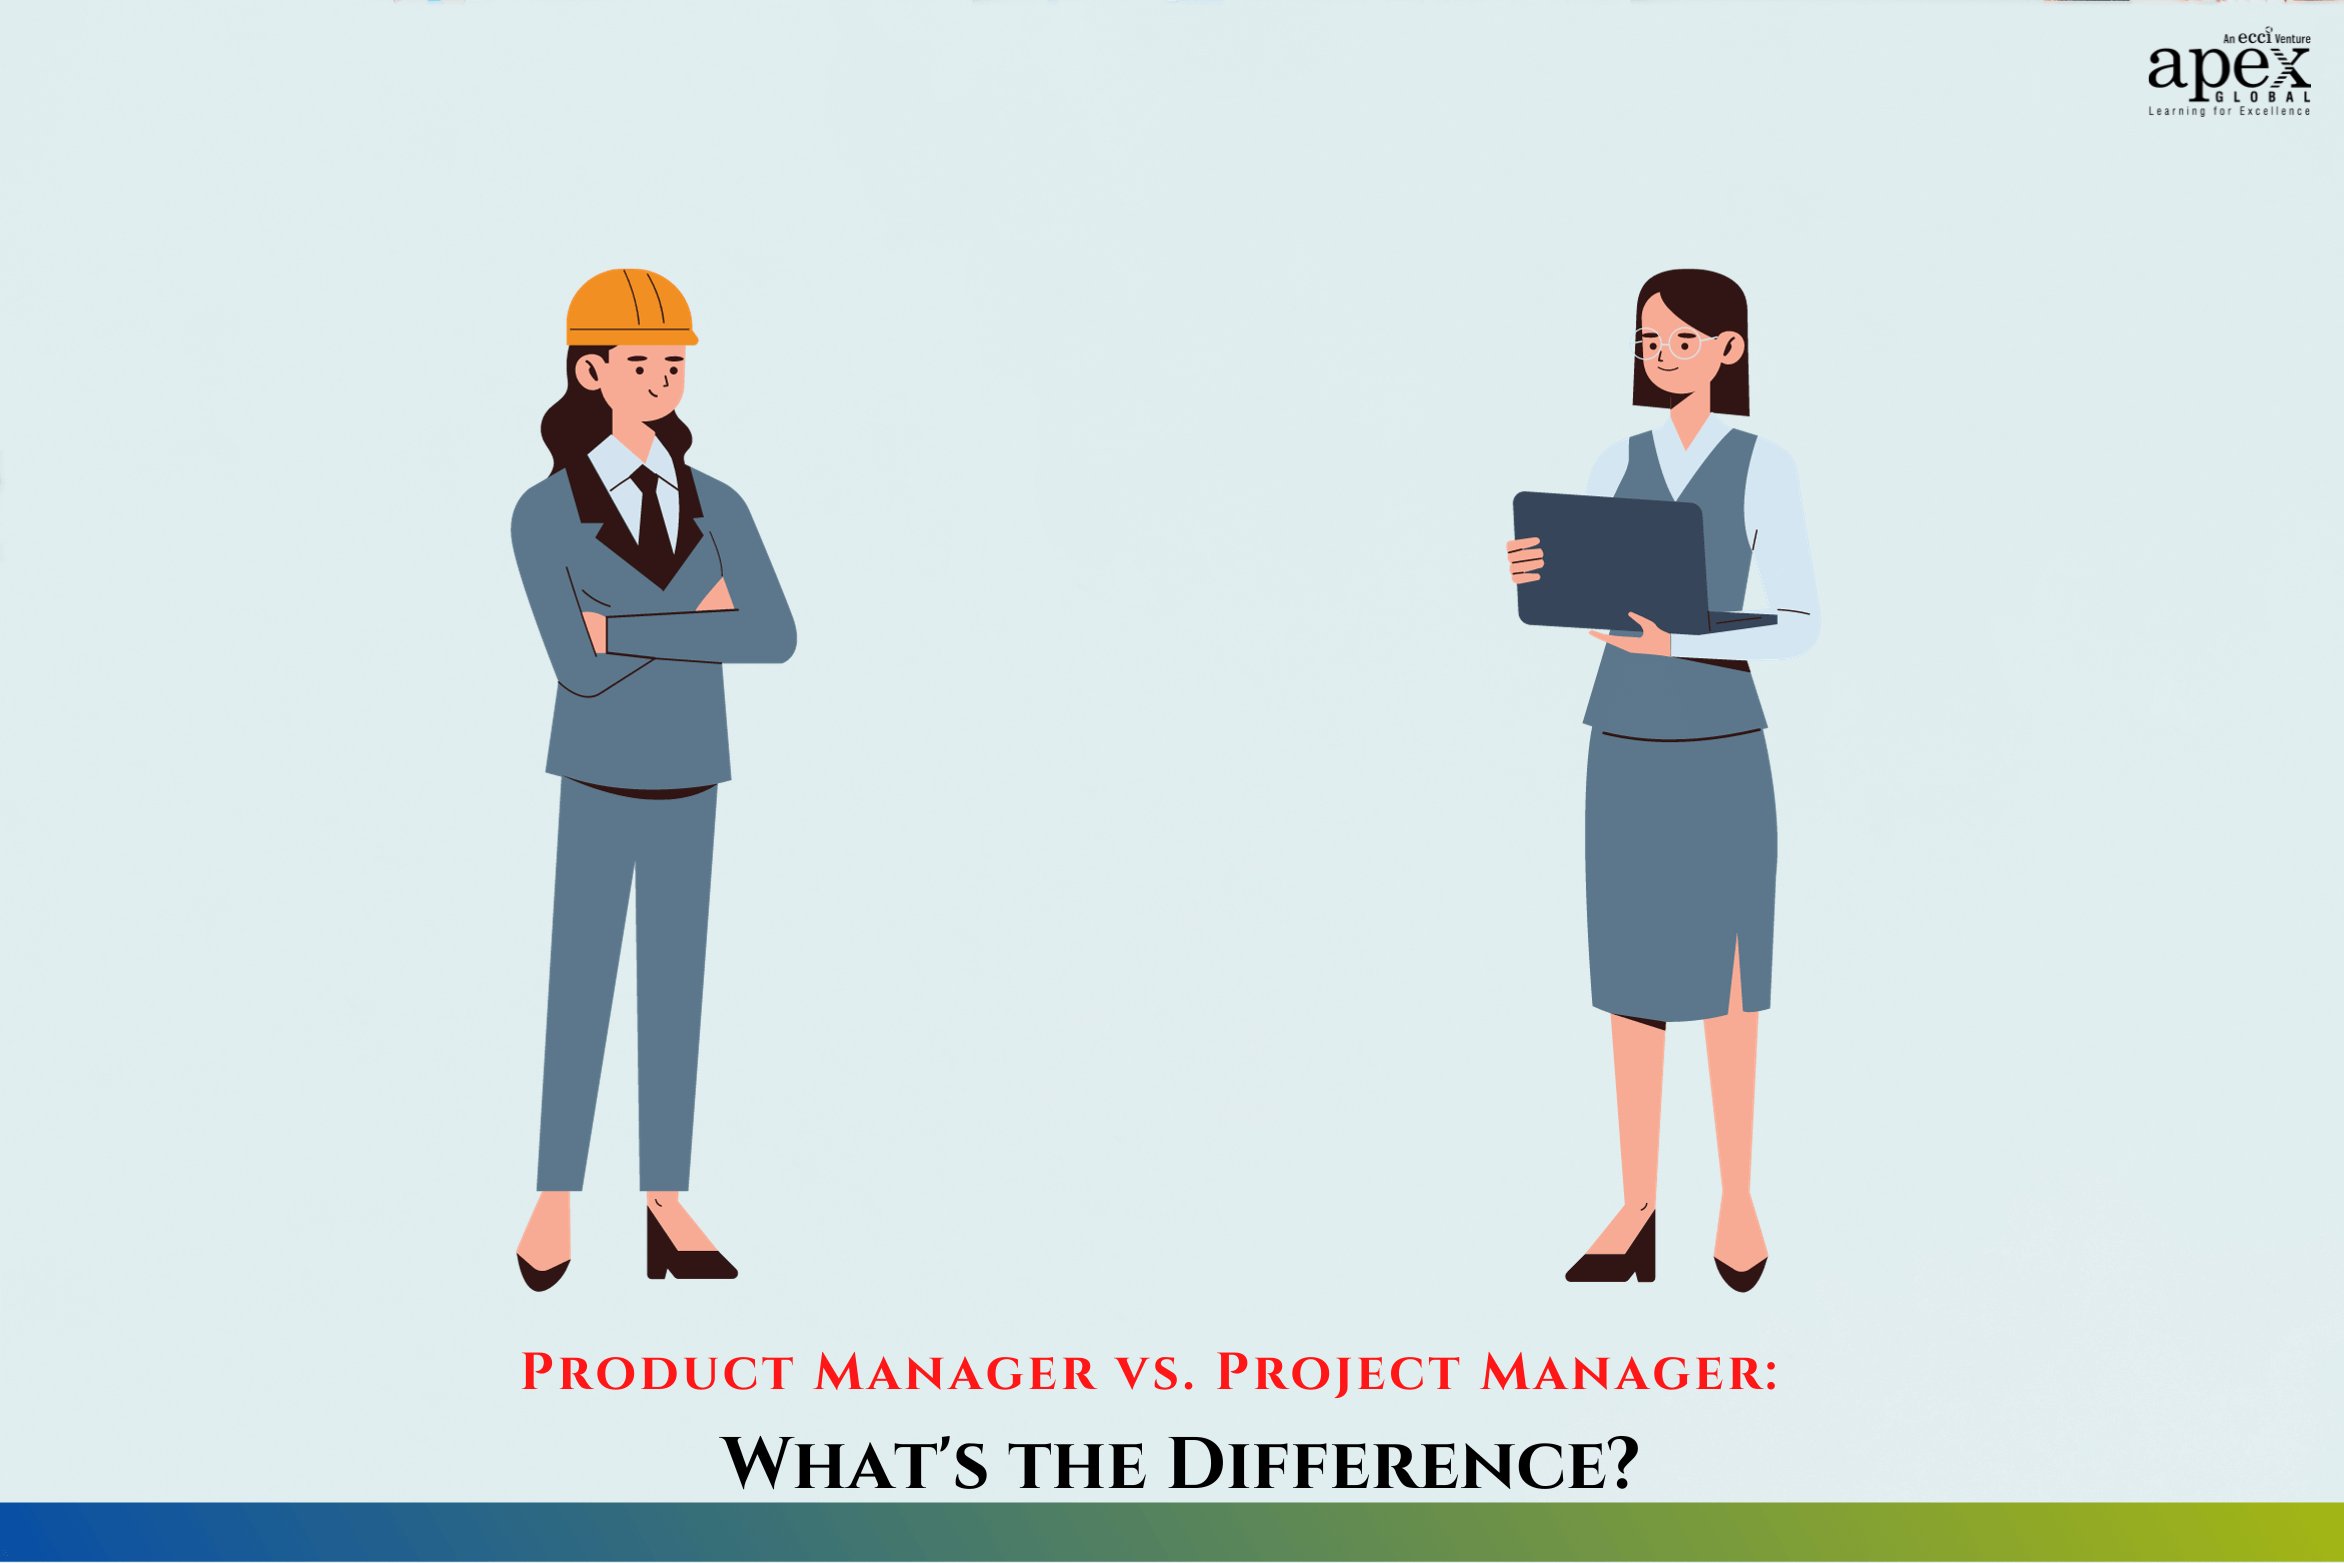 Product Manager vs. Project Manager: What's the Difference?